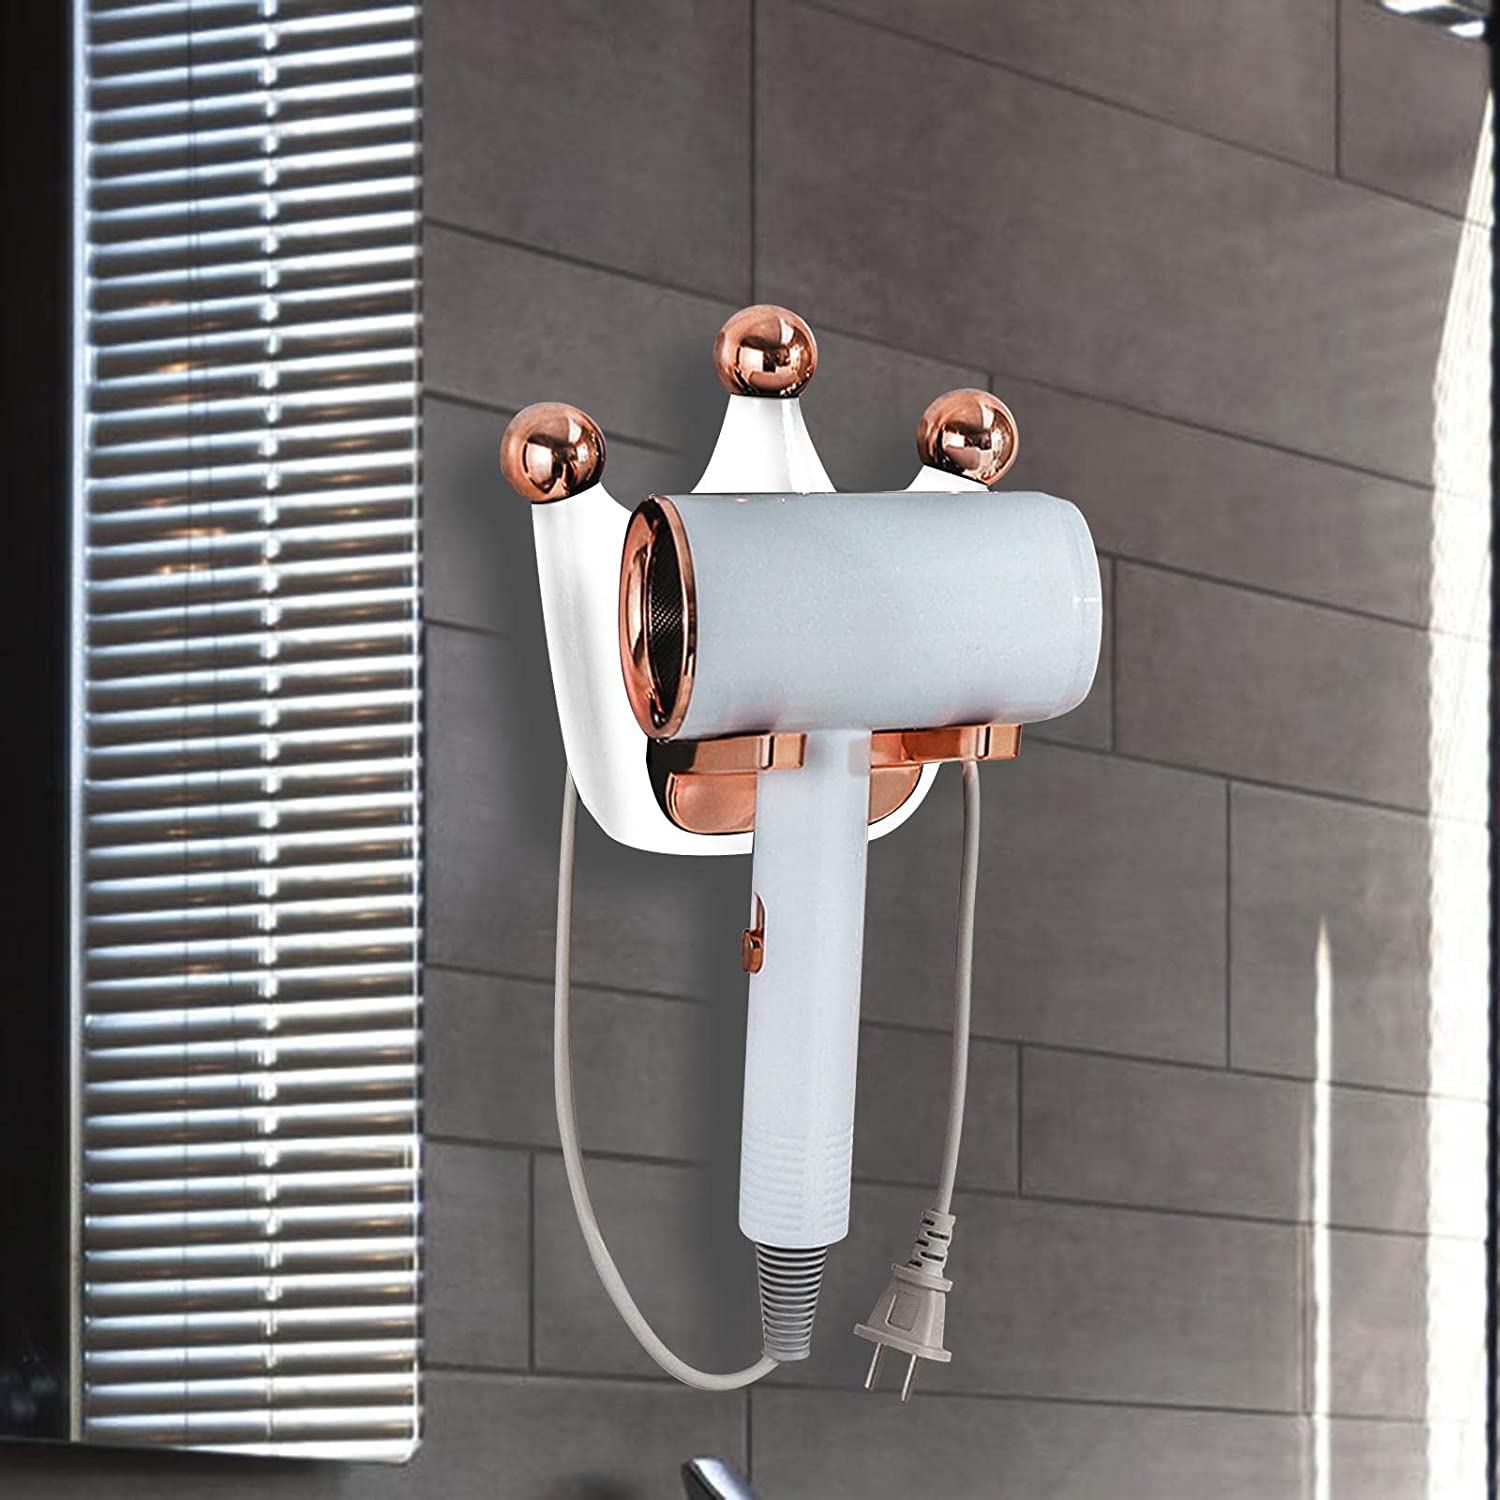 A wall-mounted hair dryer holder with a white hair dryer attached